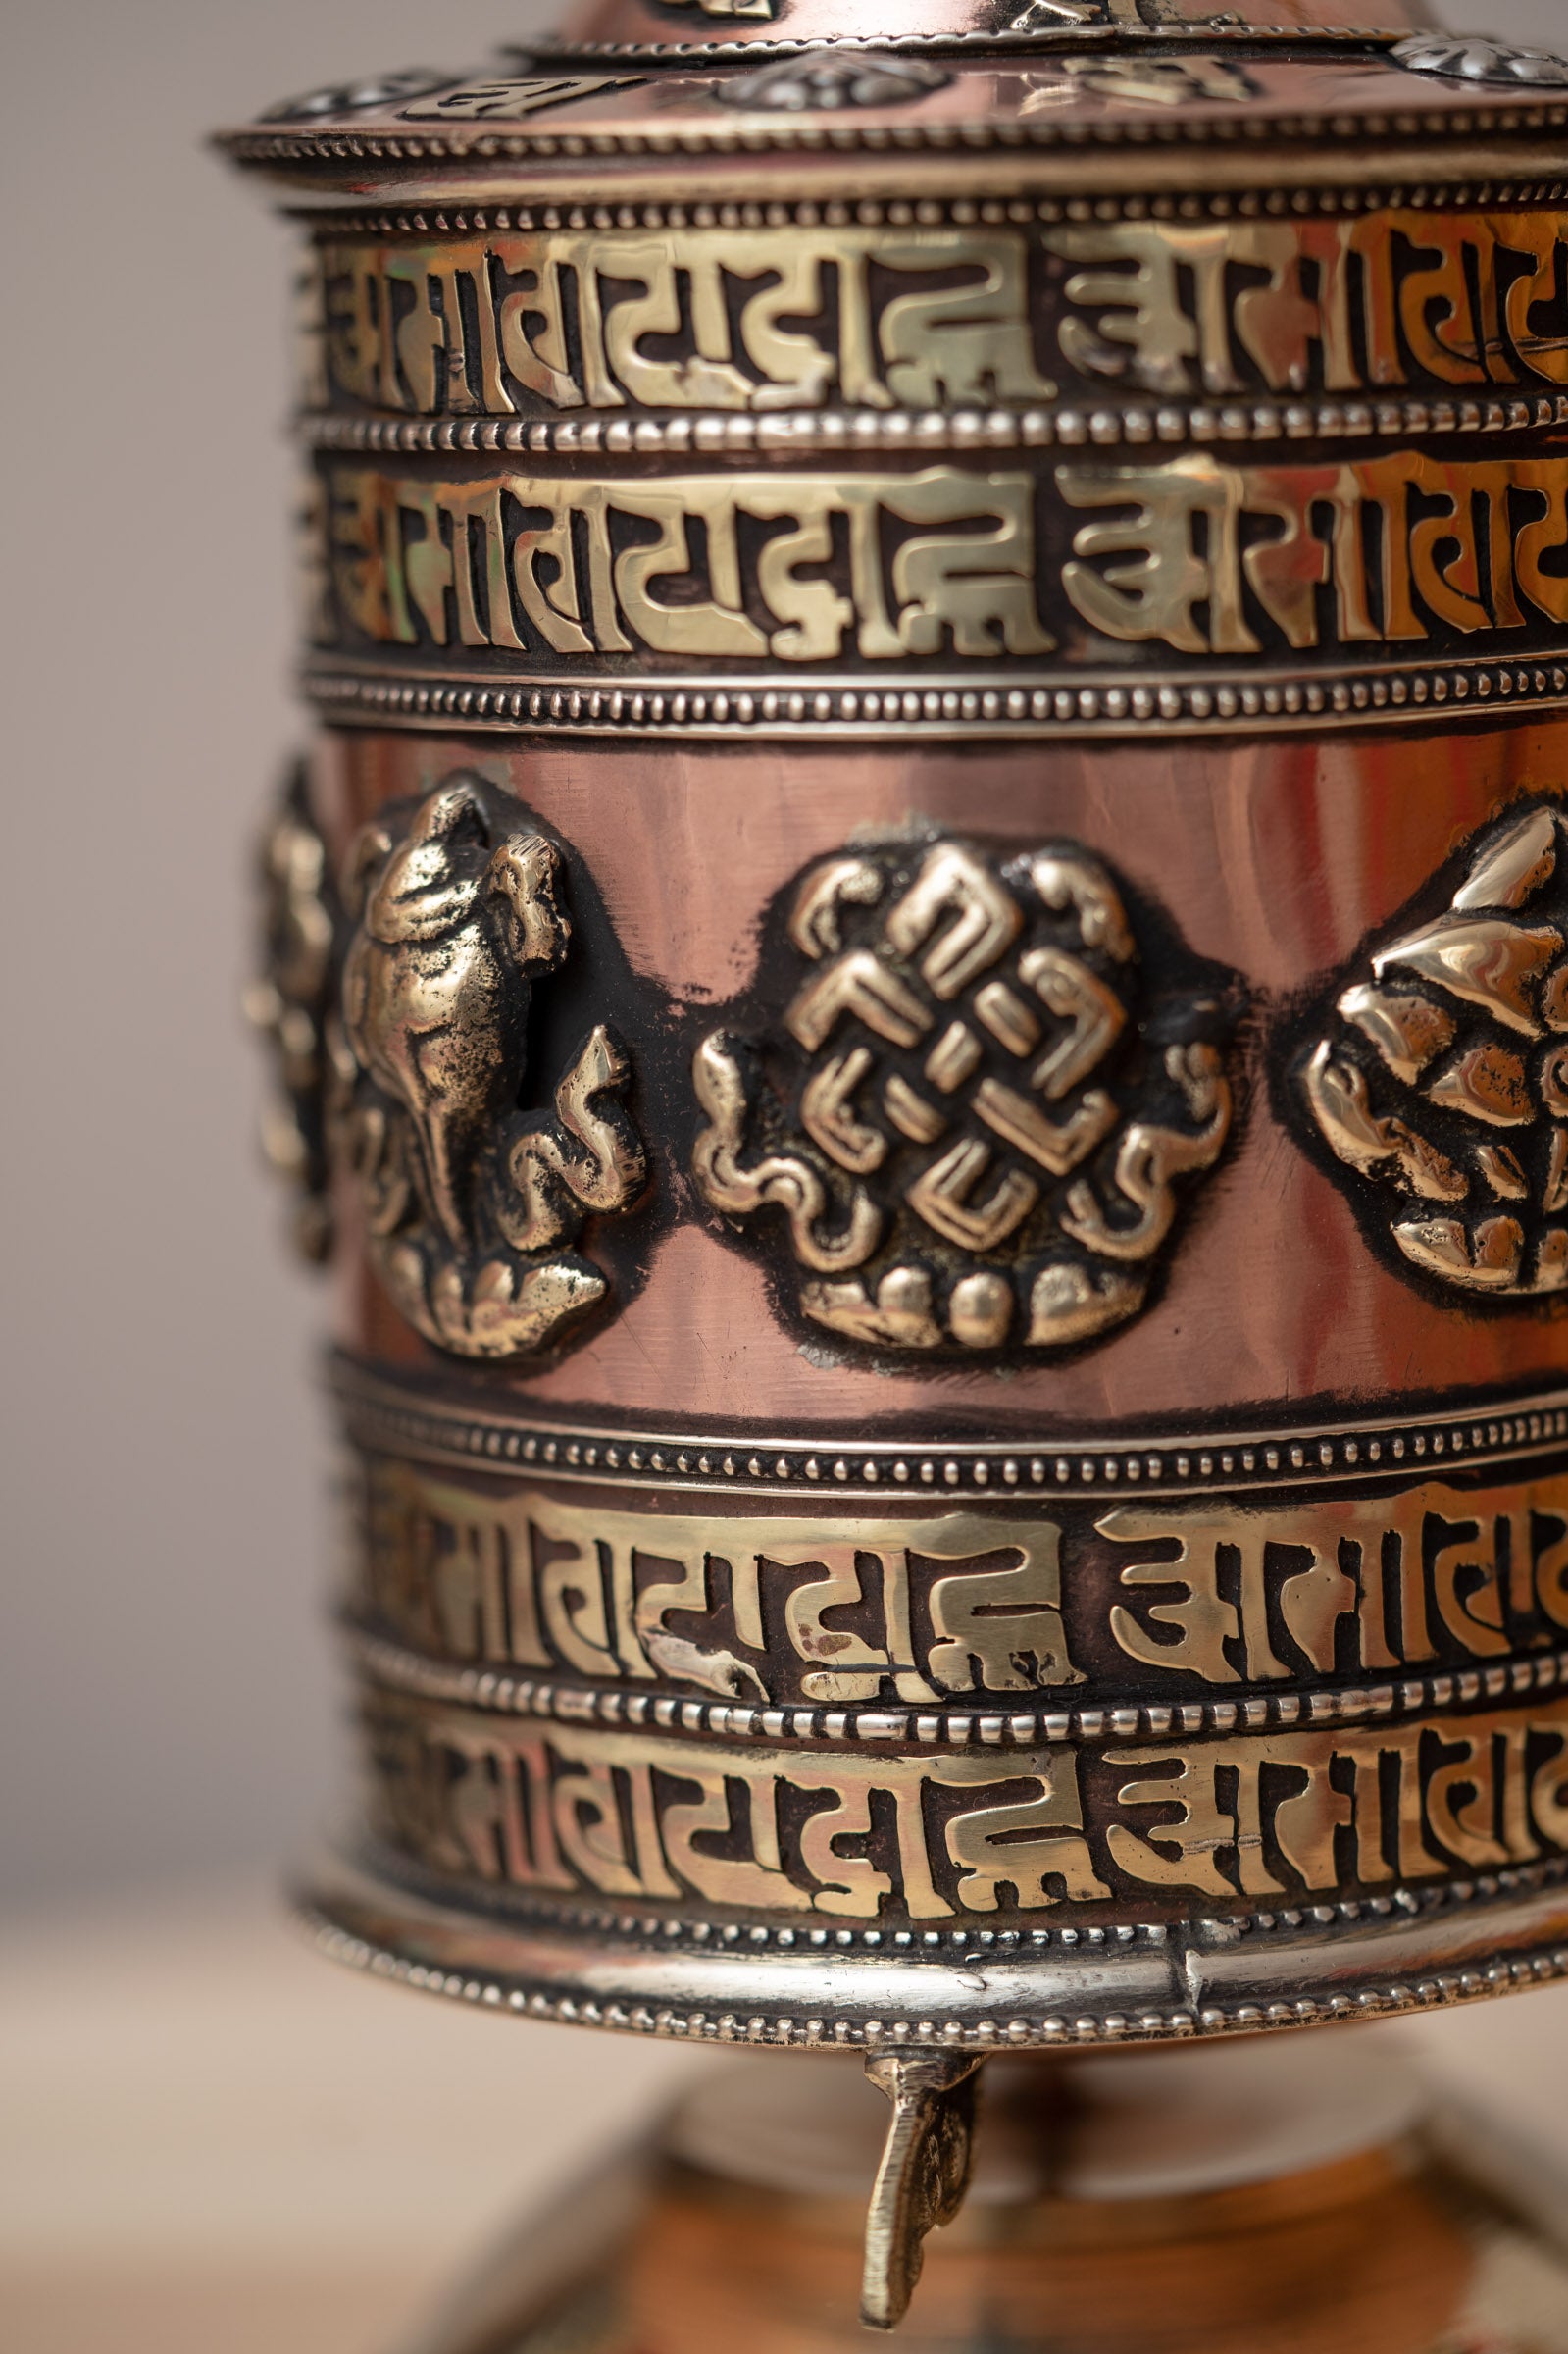   Prayer Wheel for purification and transformation of negative energies.